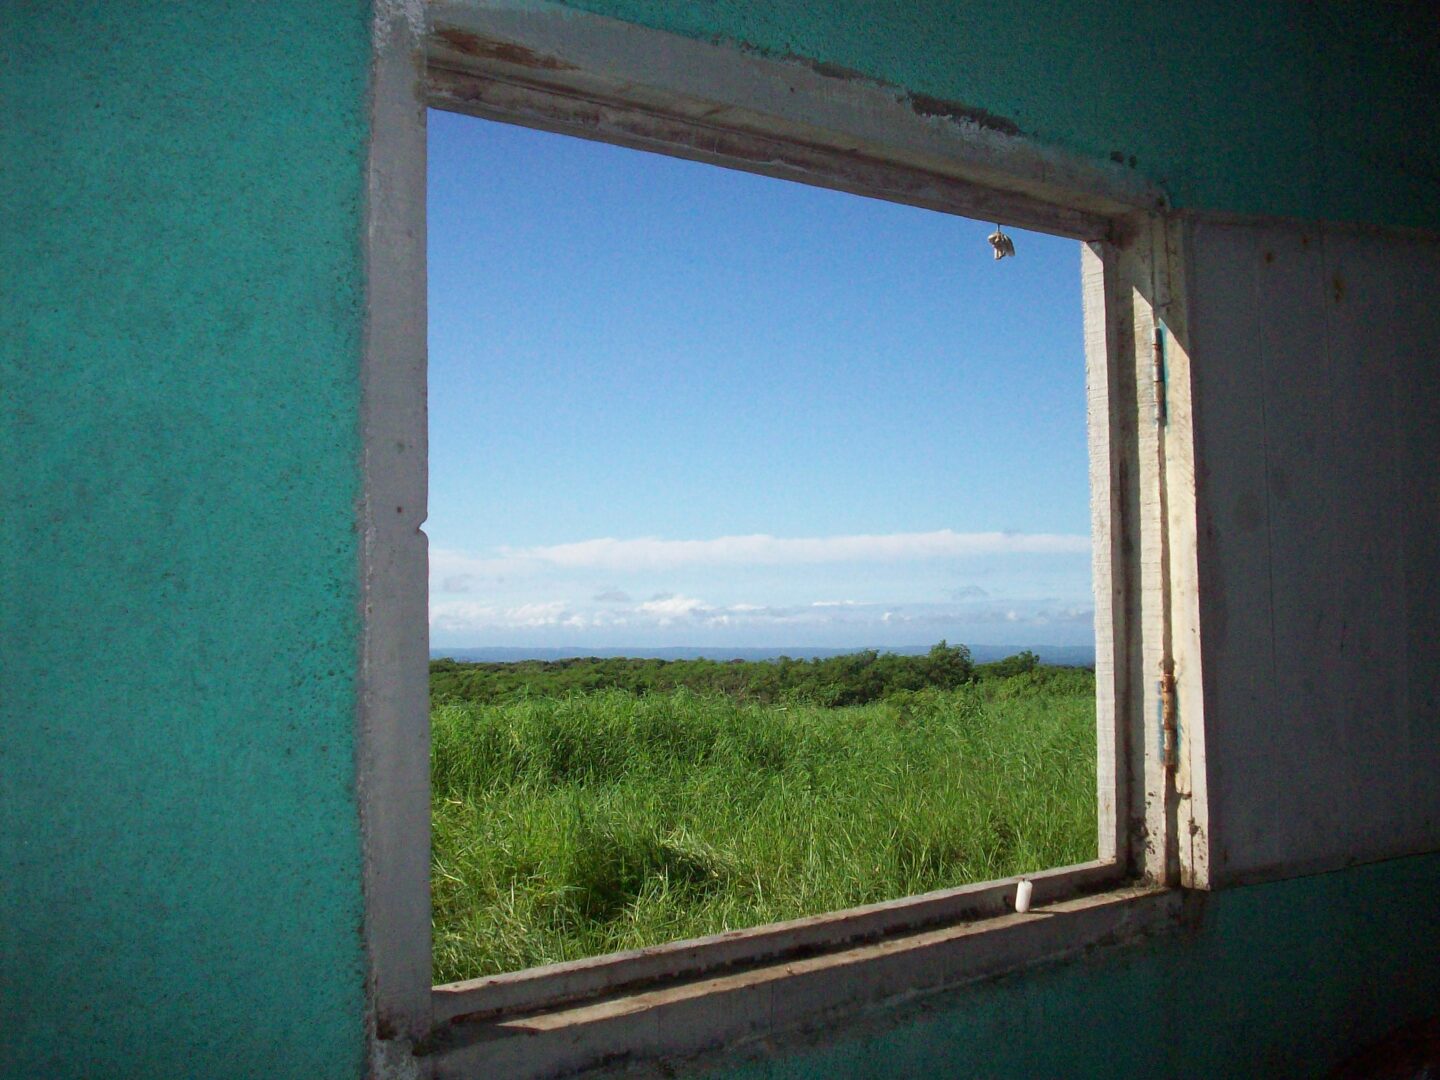 A Tattered Window Pane With a Teal Wall